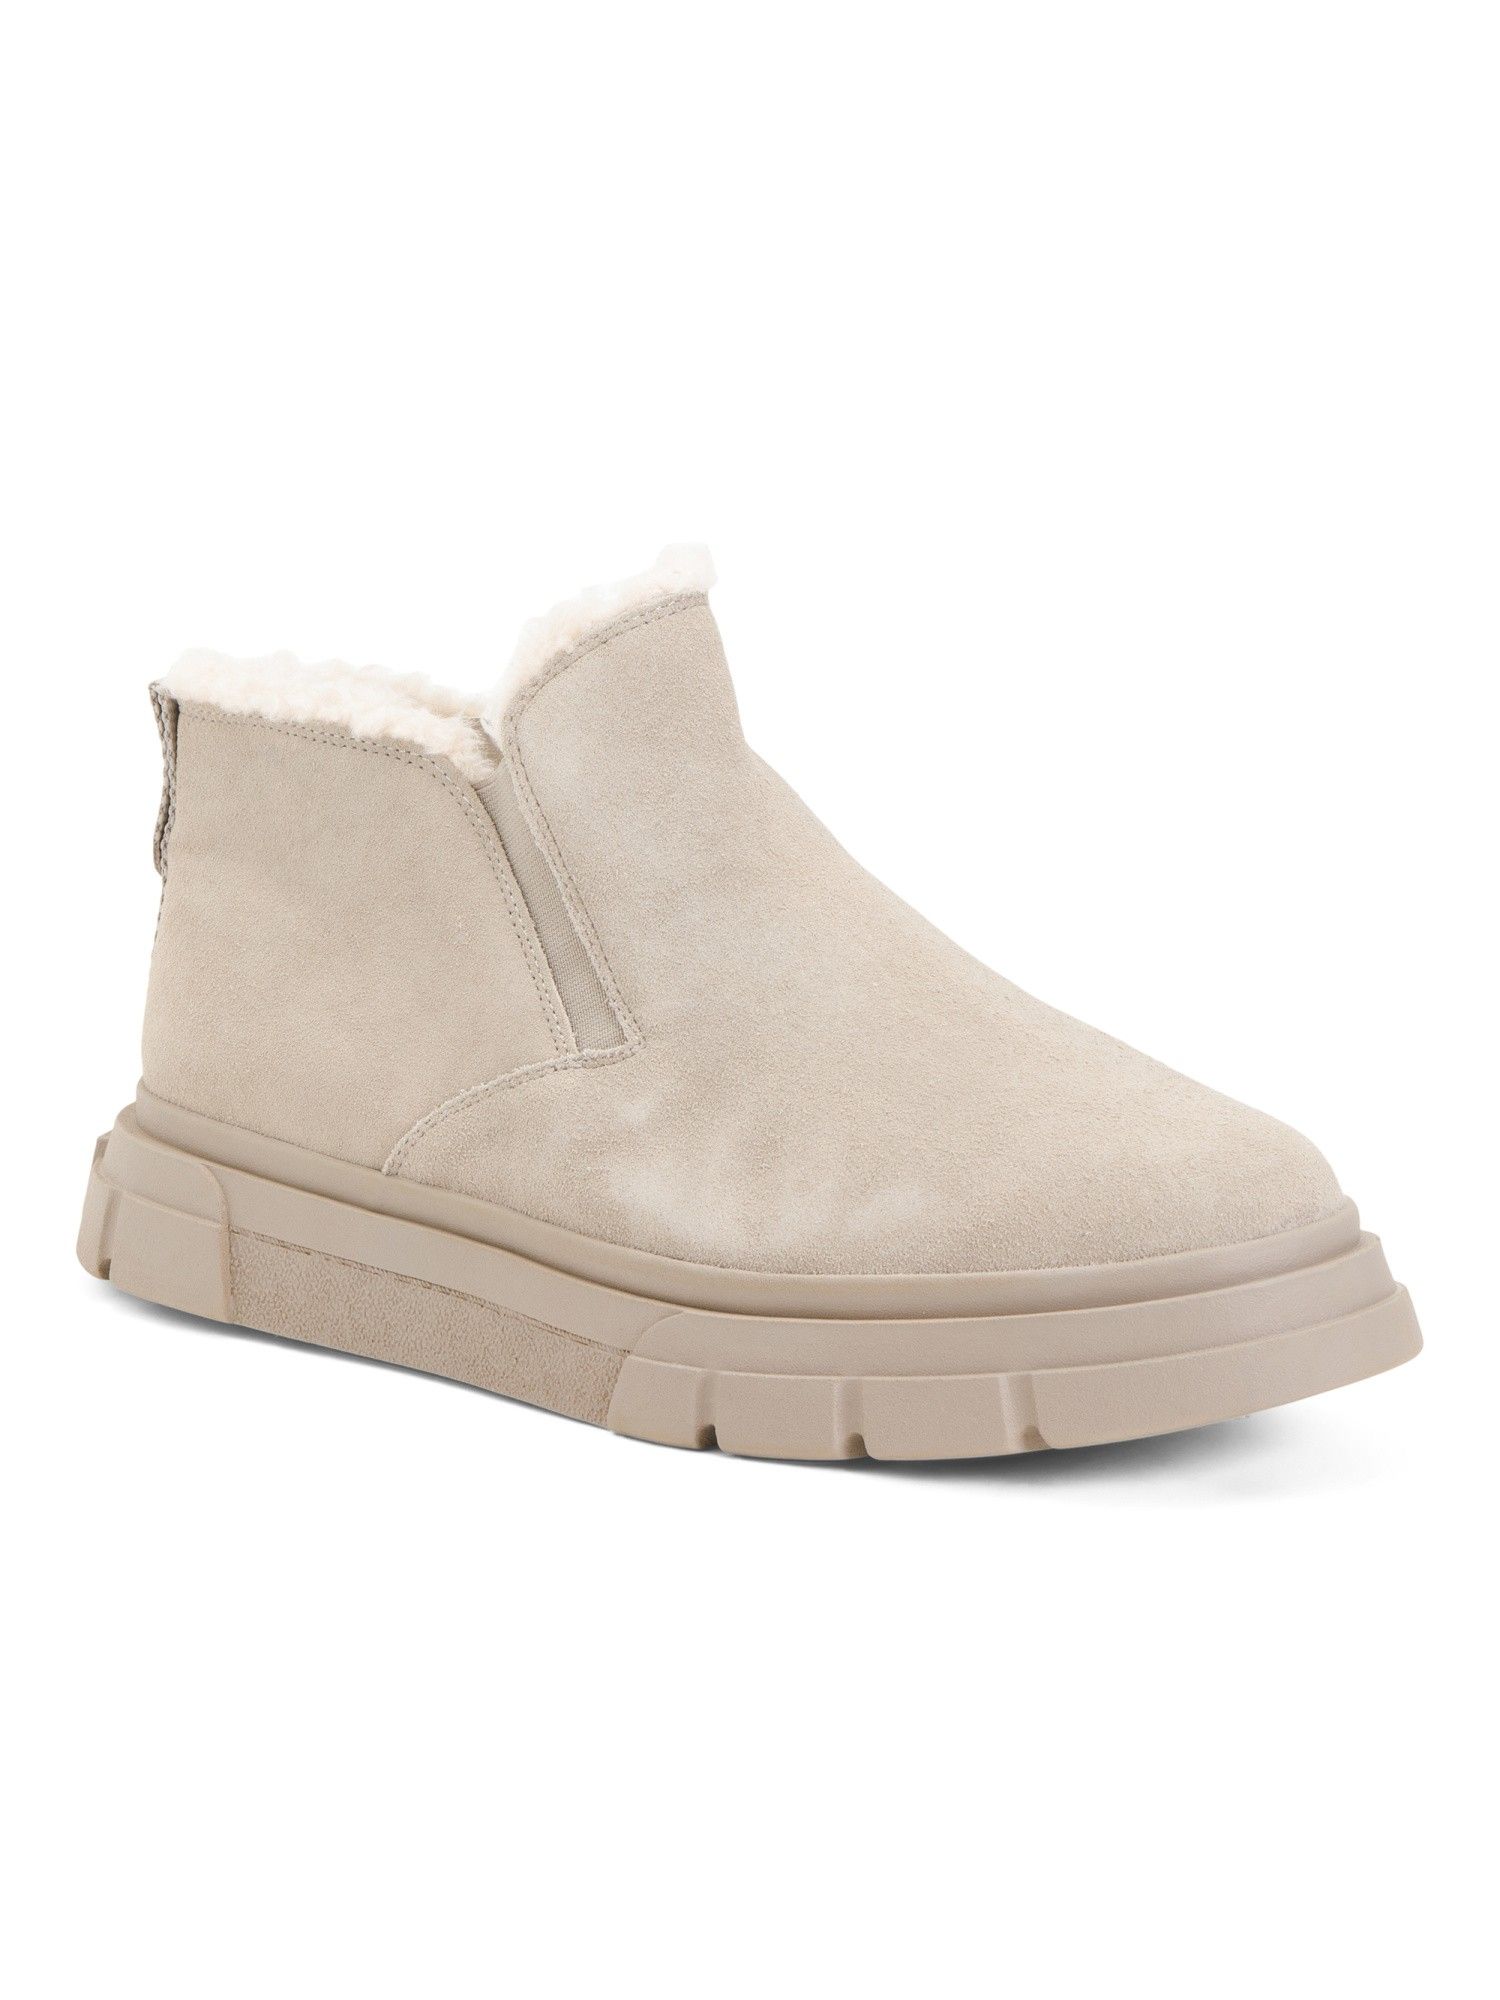 Faux Fur Lined Sneaker Boots | Women's Shoes | Marshalls | Marshalls